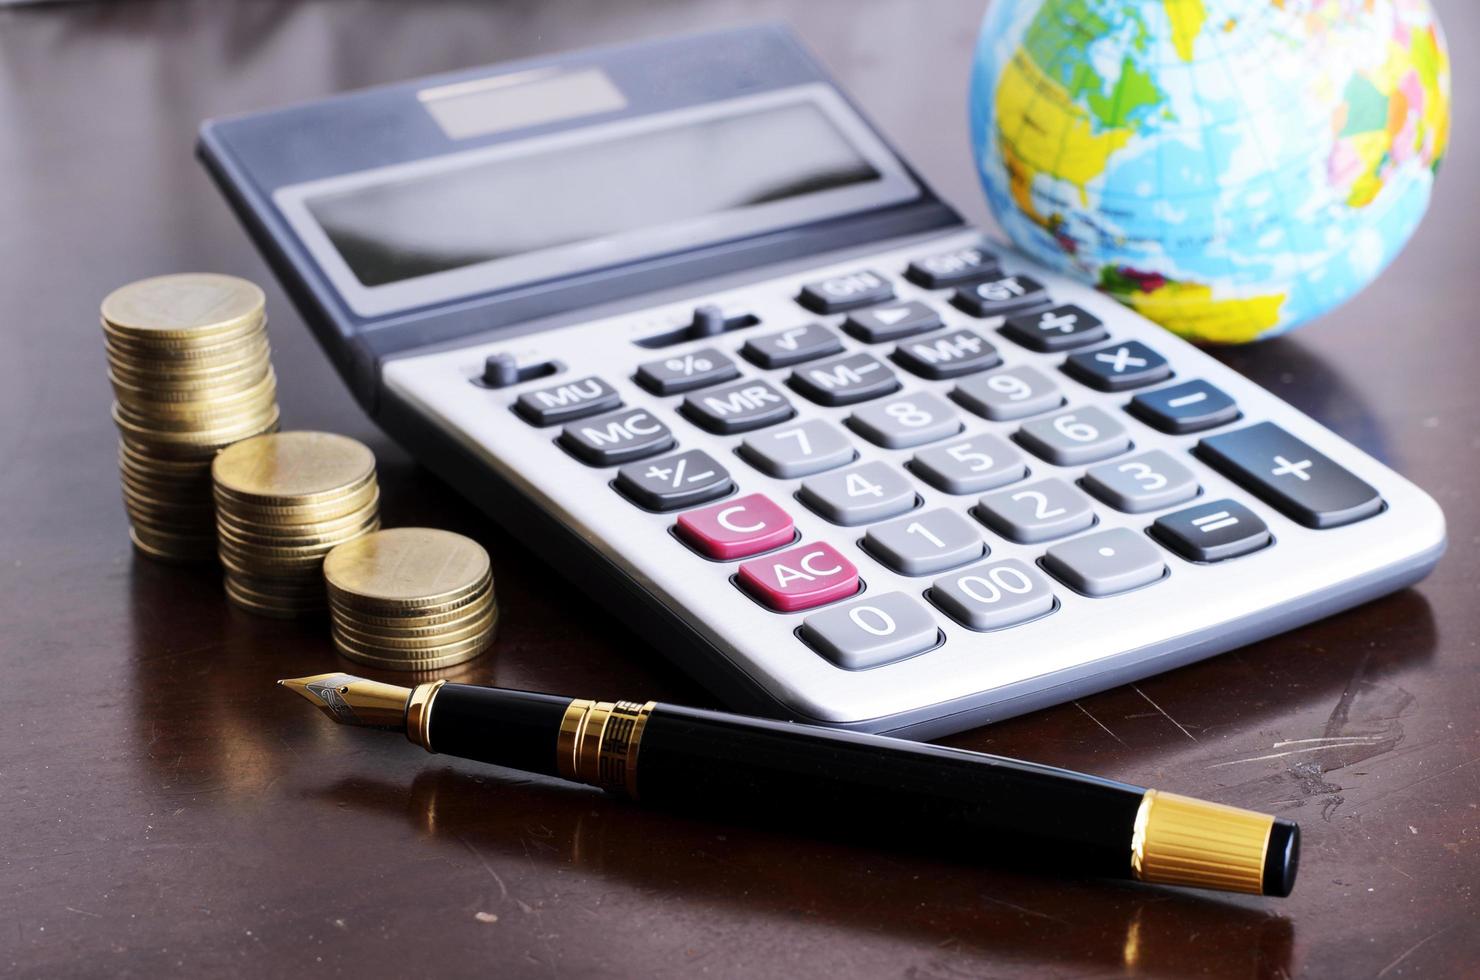 Fountain pen and calculator money coins stack and earth for Business concept photo